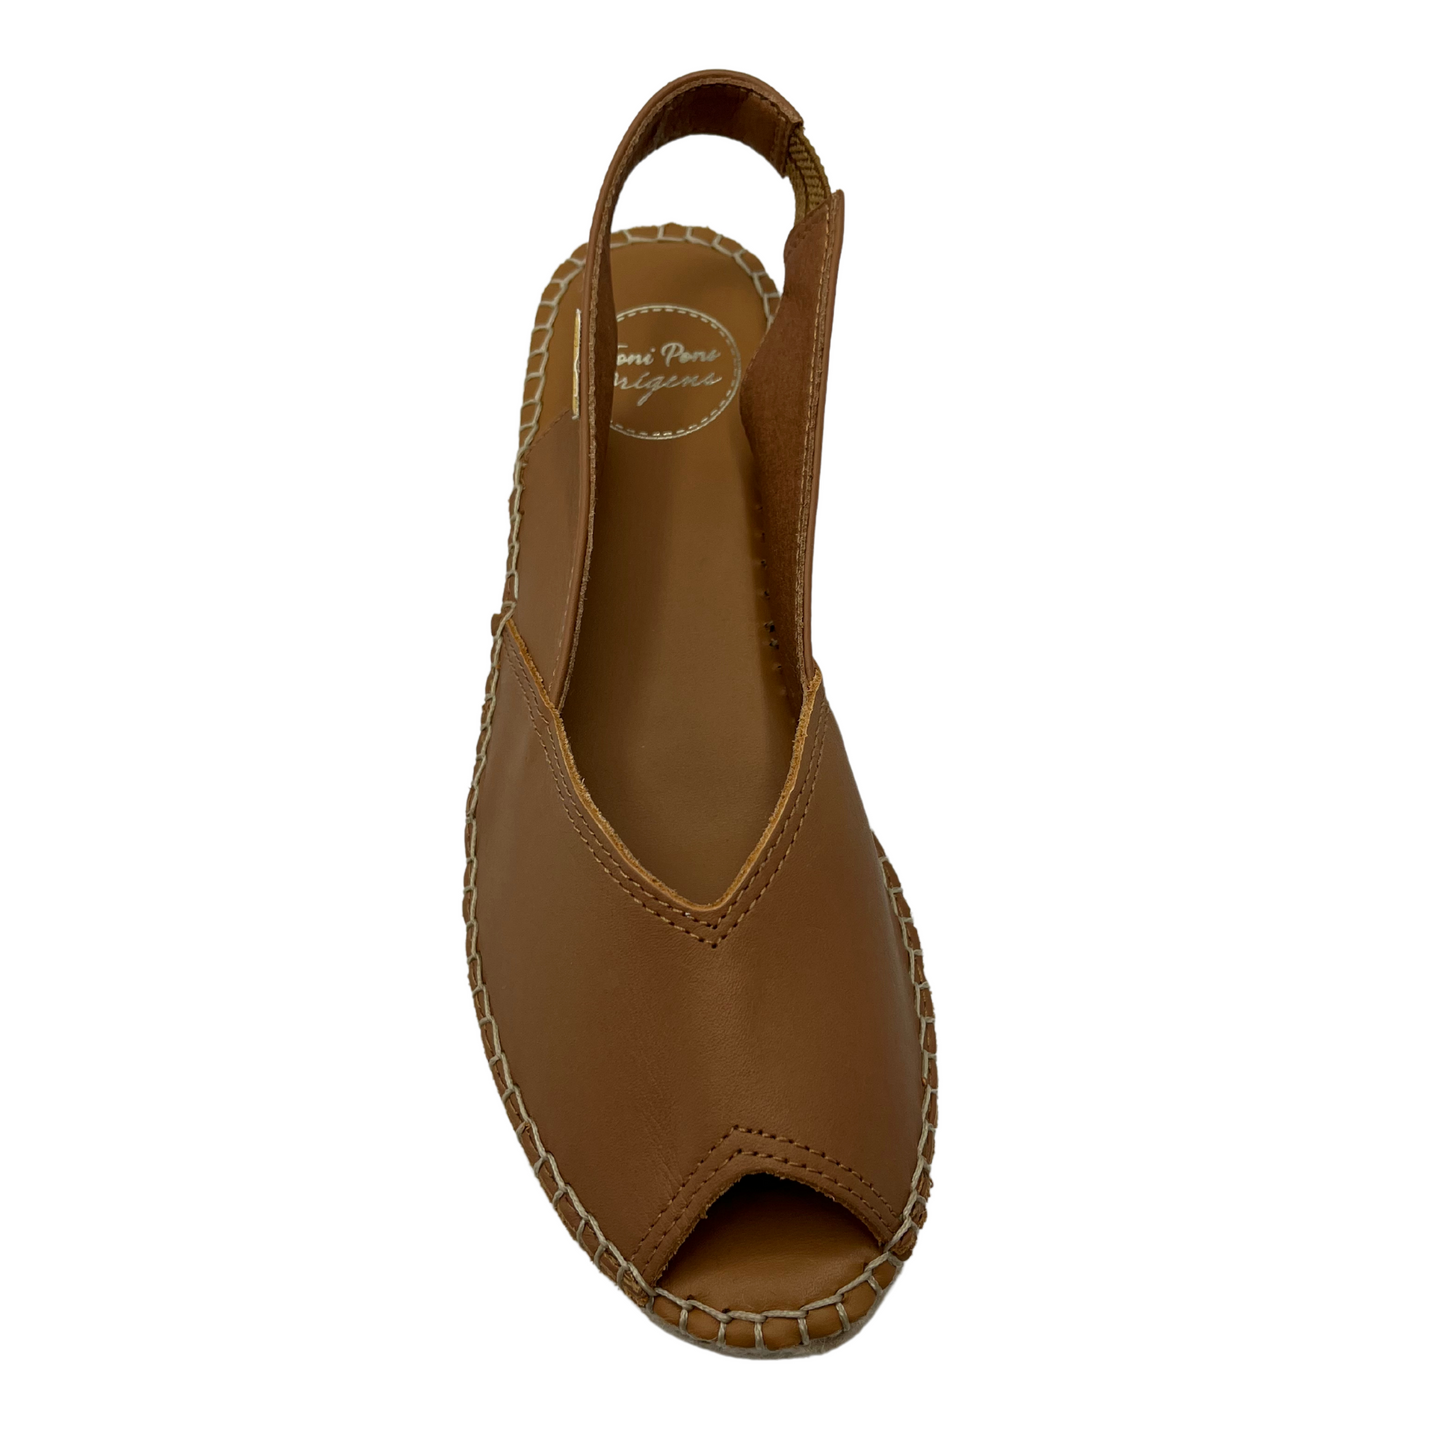 Top view of tan leather espadrille sandal with peep toe and sling back